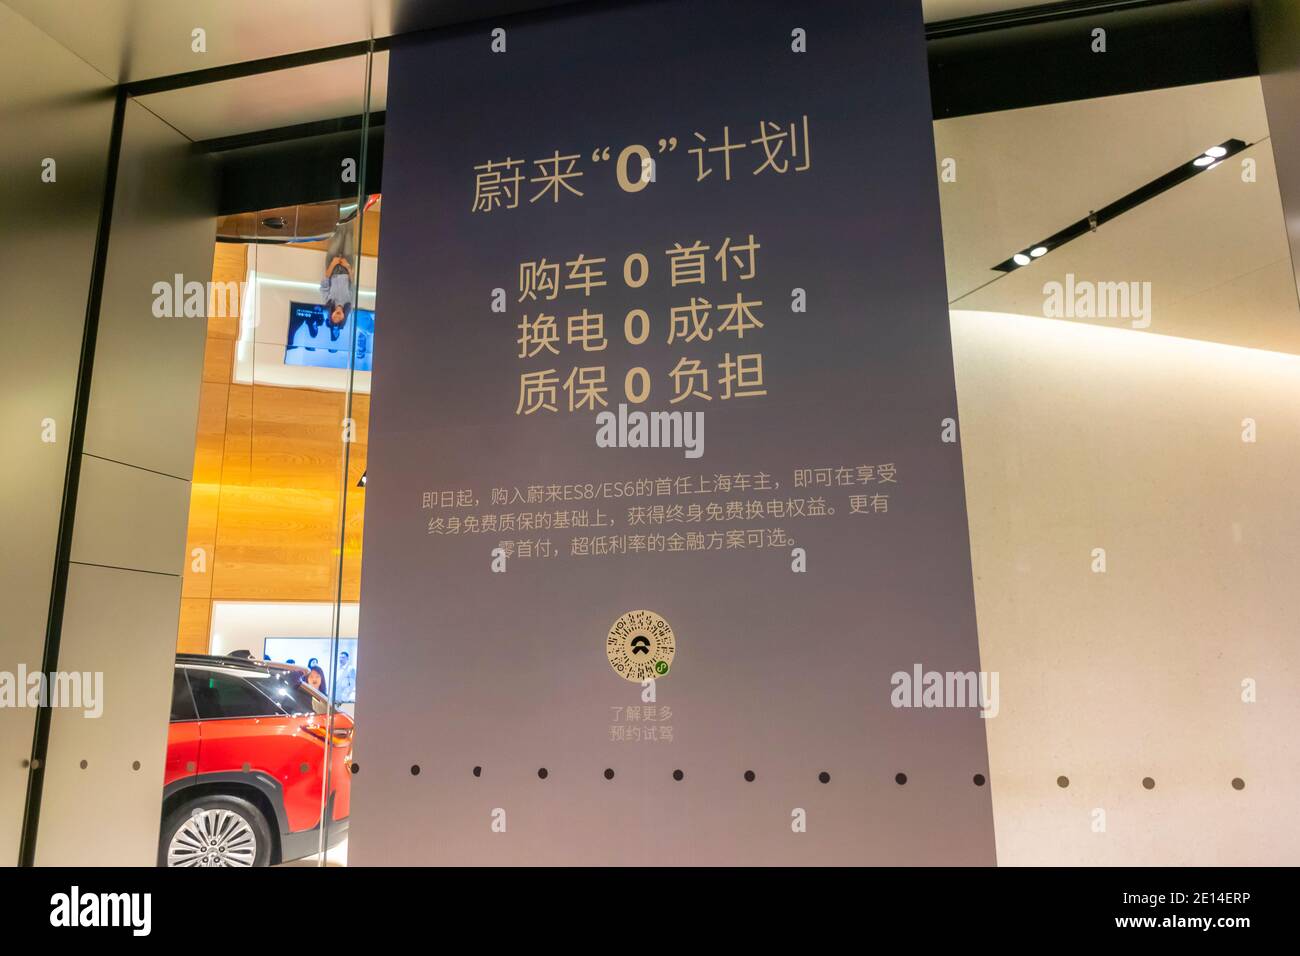 Shanghai, Cina, Chinese Car Company Showroom in Luxury Shopping Mall, HKRI Taikoo Hui, Shopping Center, NIO Home Corp. Store Display, auto a basso consumo energetico Foto Stock